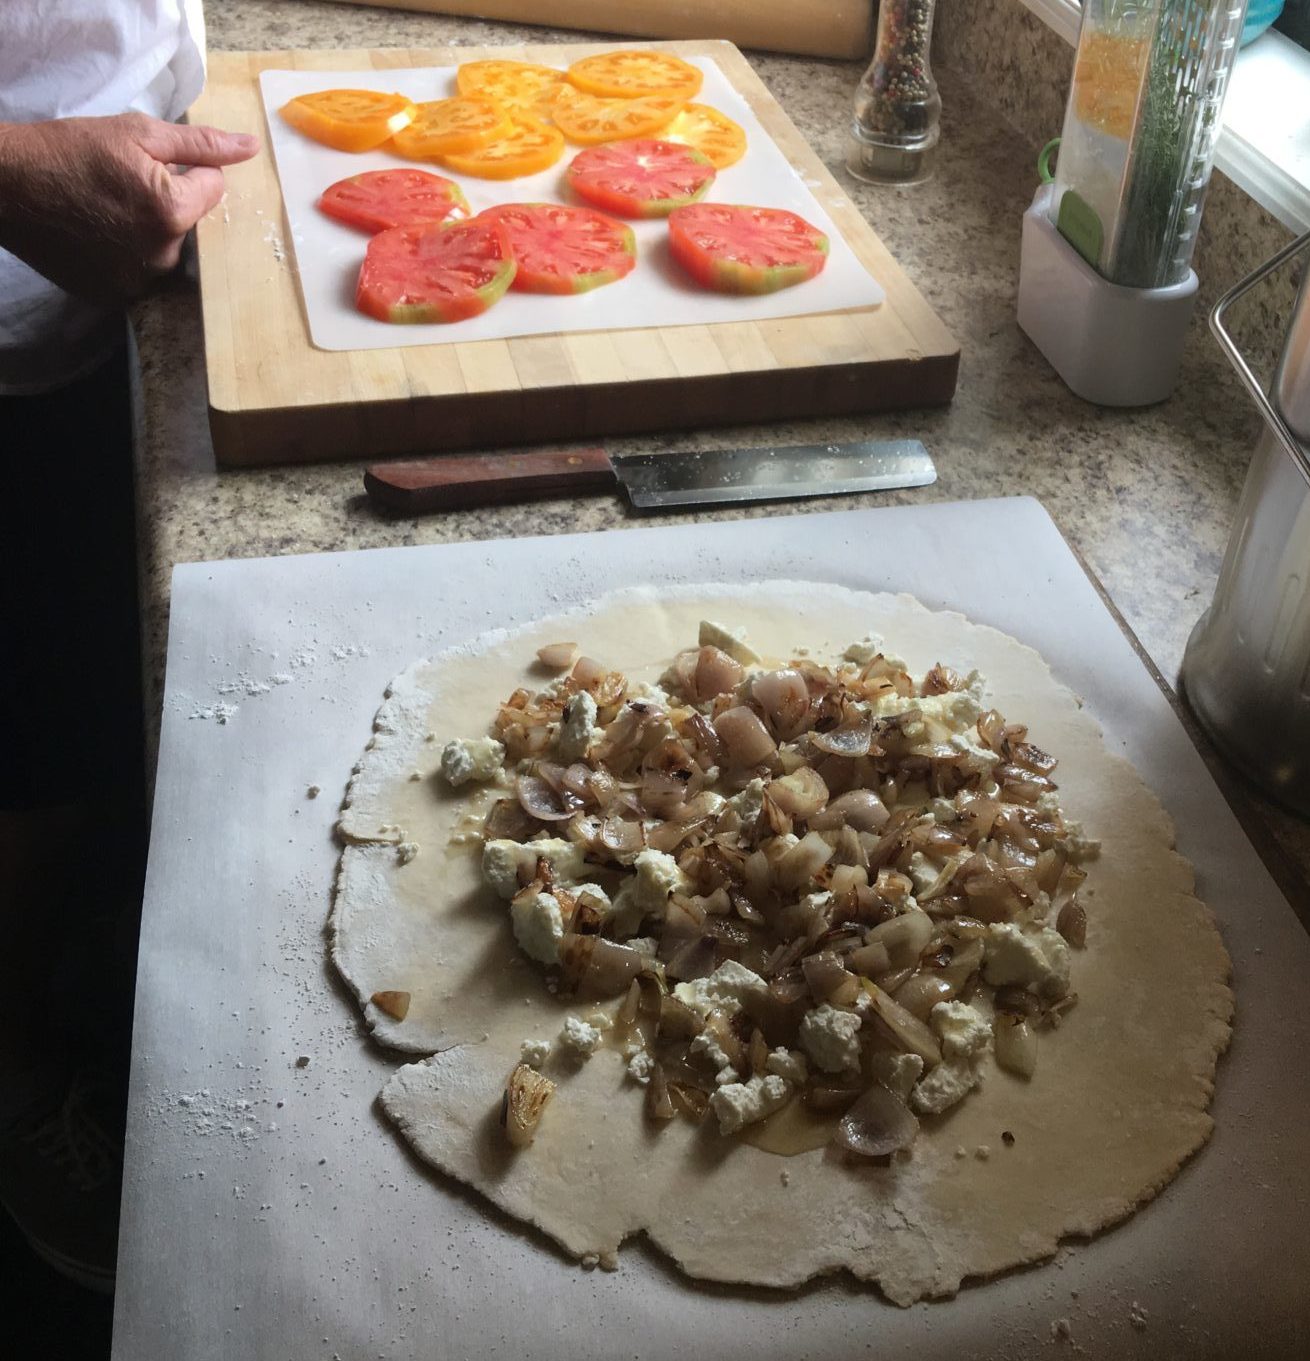 Tomato galette assembly